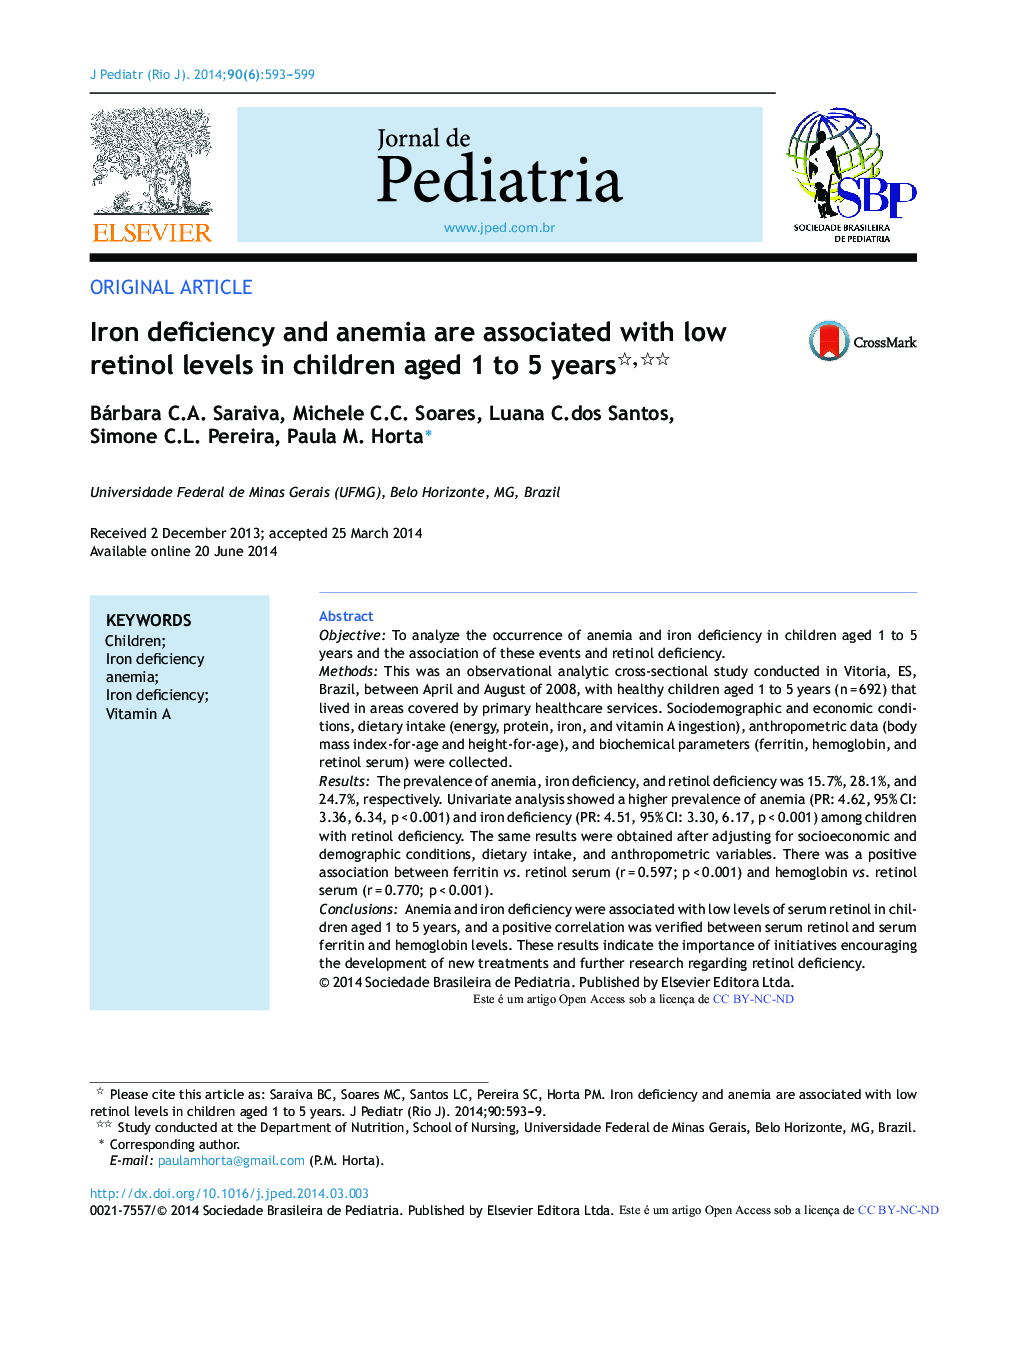 Iron deficiency and anemia are associated with low retinol levels in children aged 1 to 5 years 